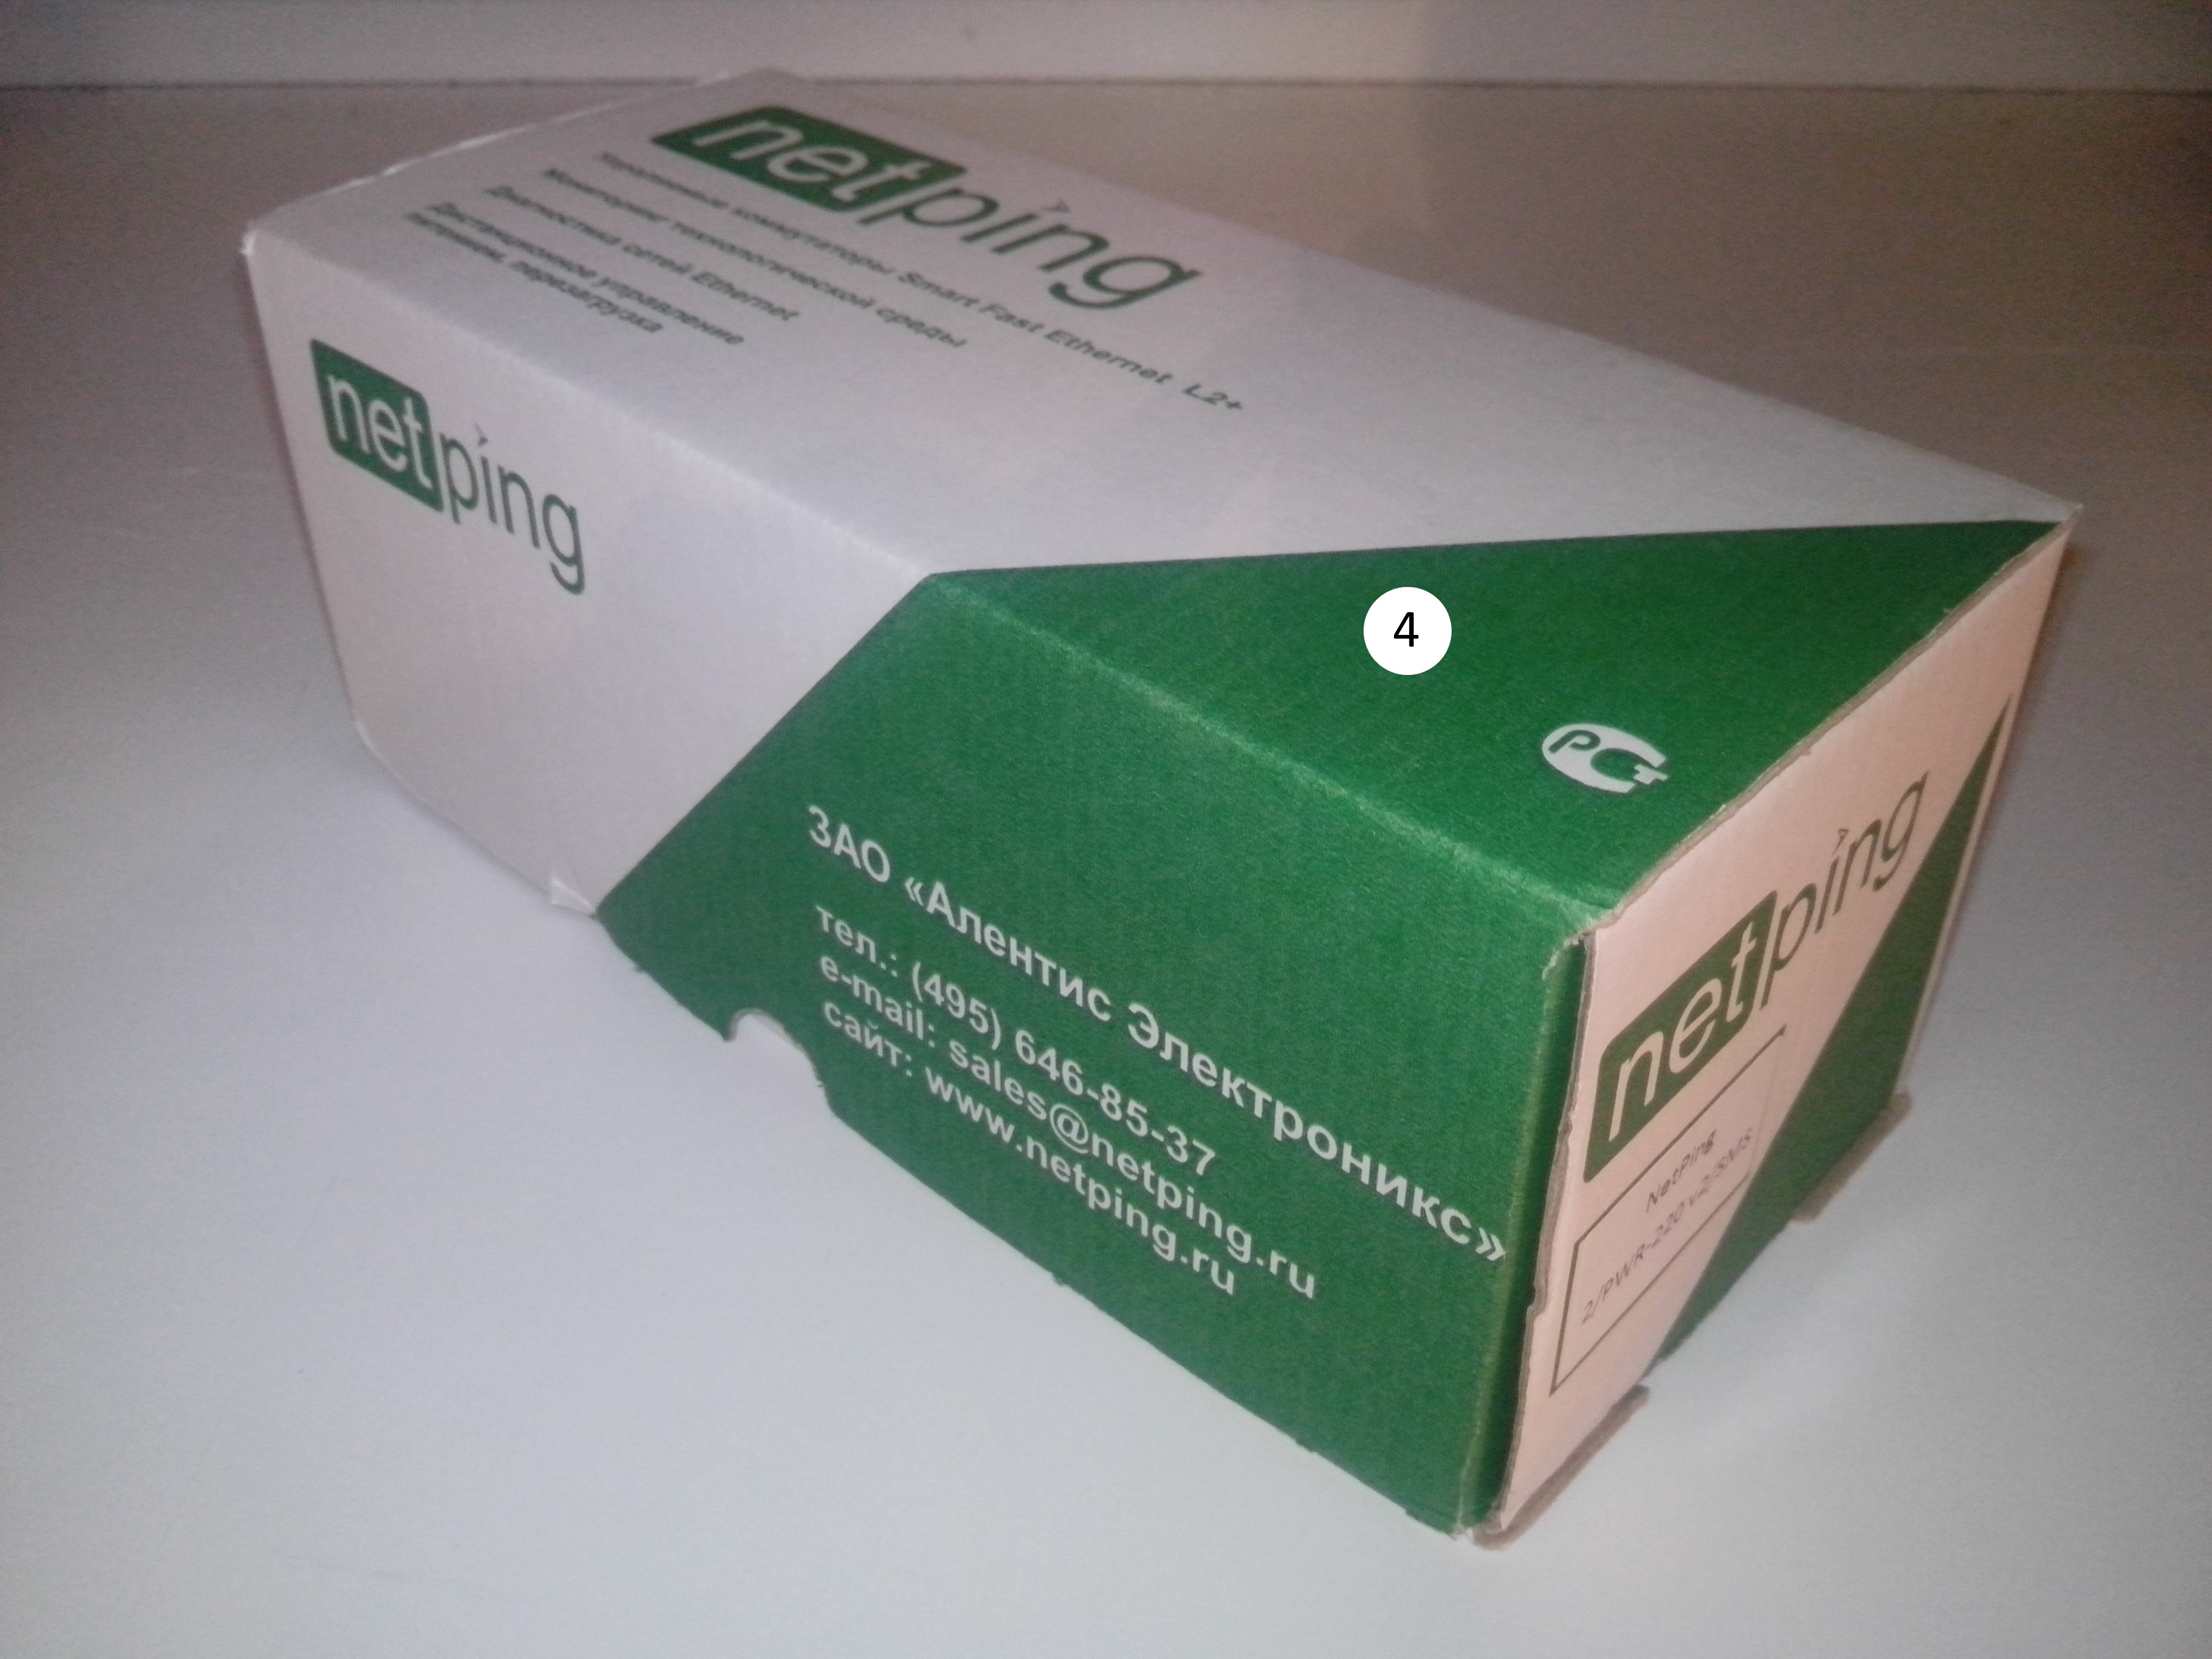 Packaging box of a NetPing 2PWR-220 v2SMS device